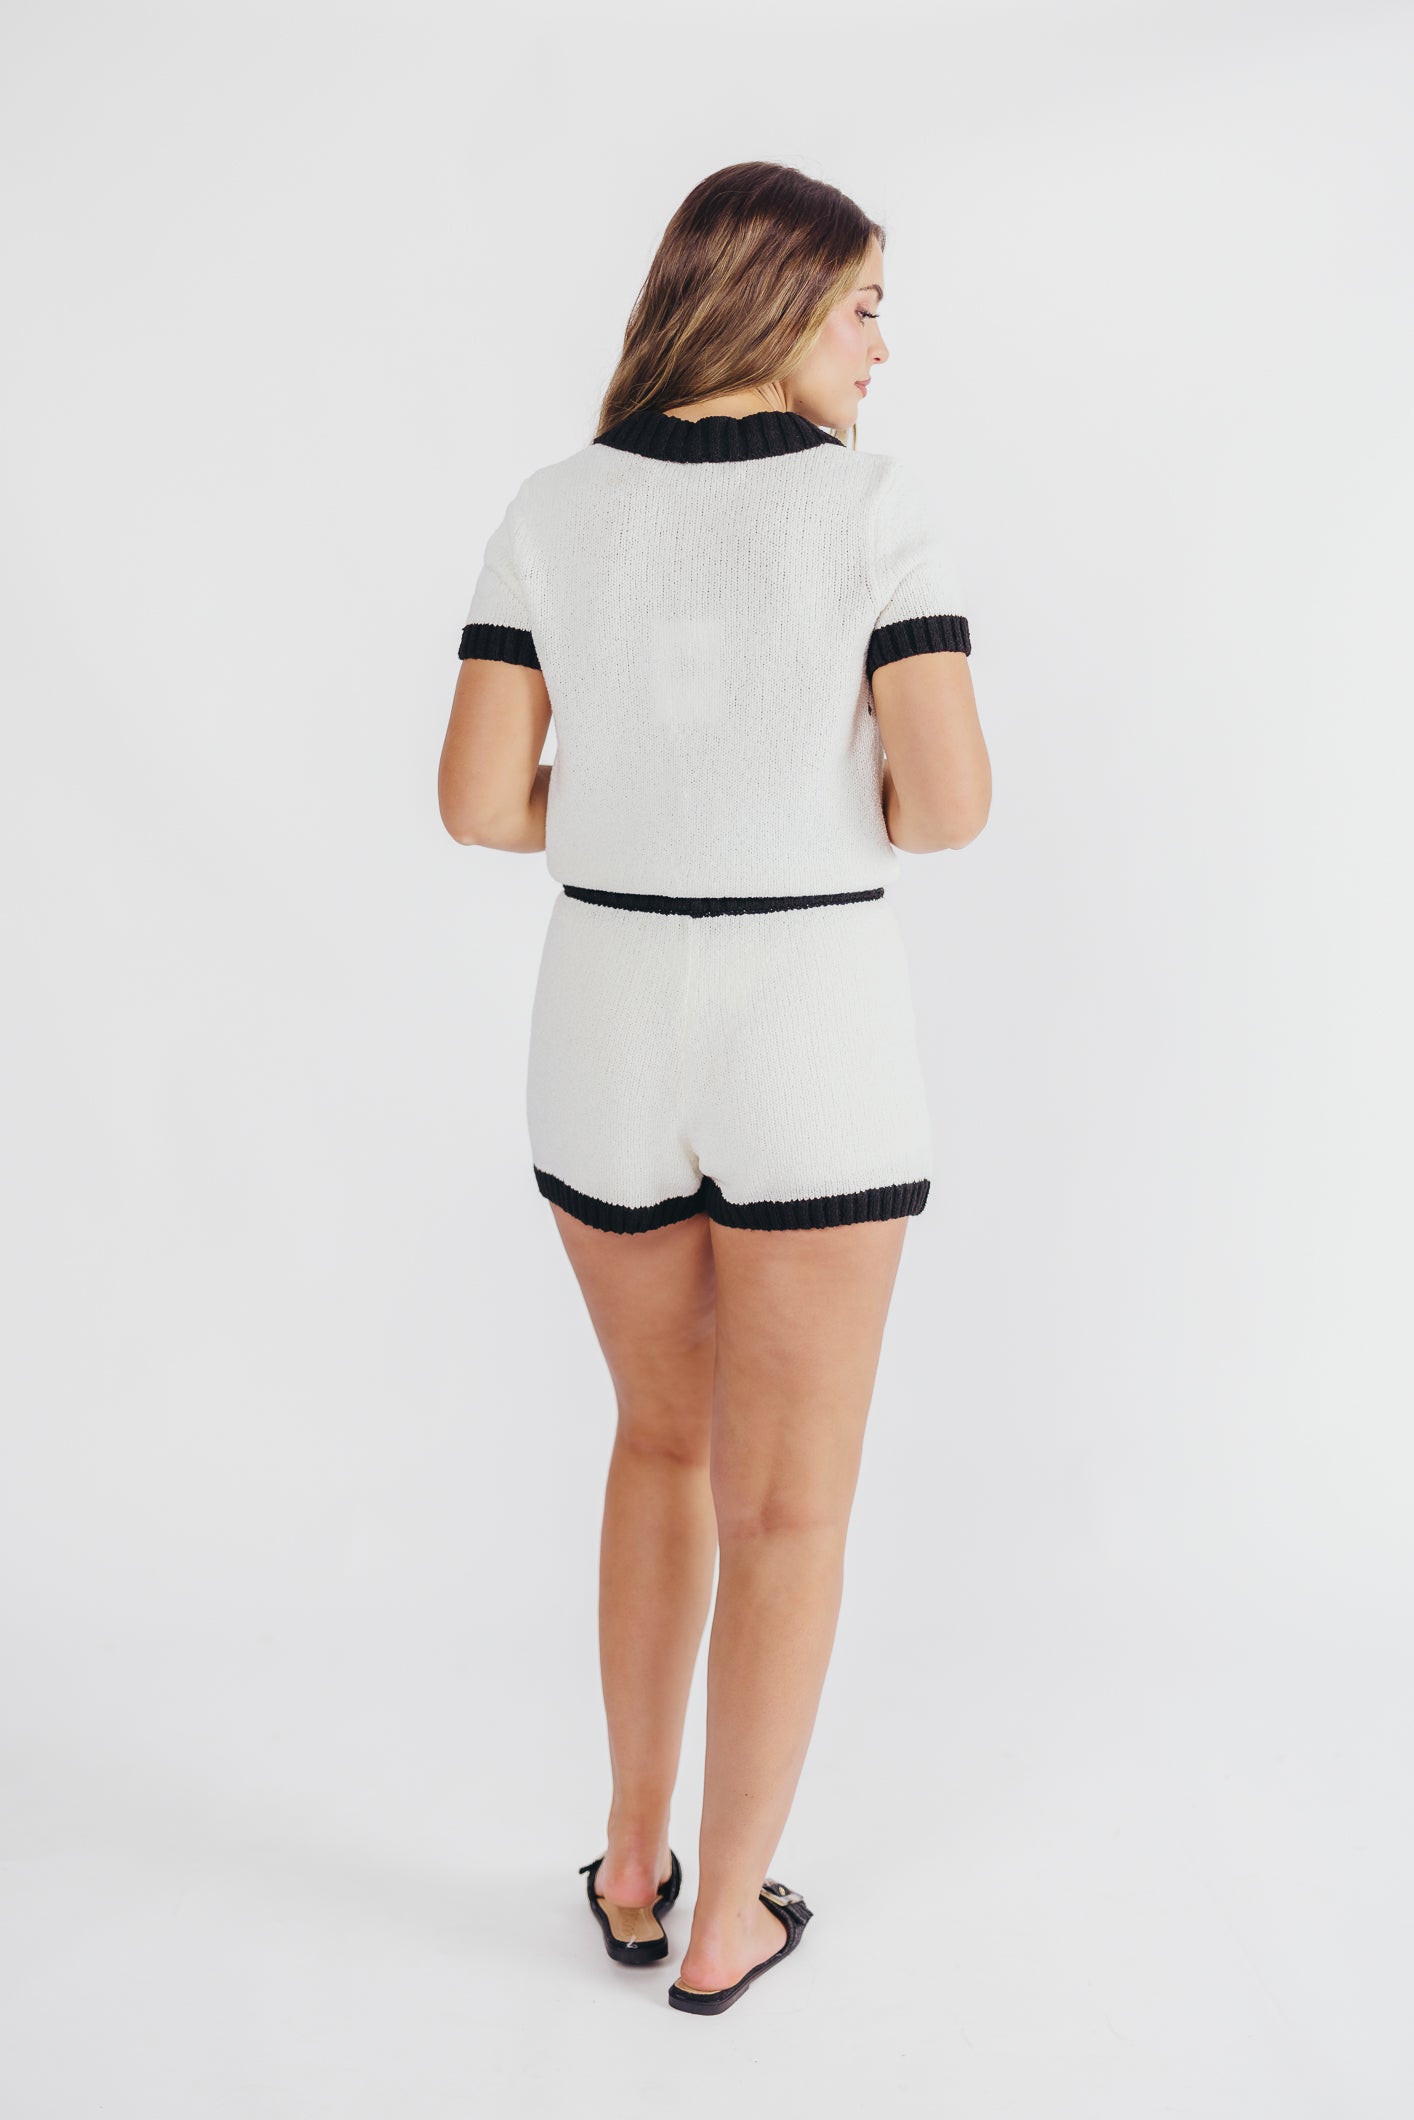 Grayson Knit Collared Top and Shorts Set in Ivory/Black